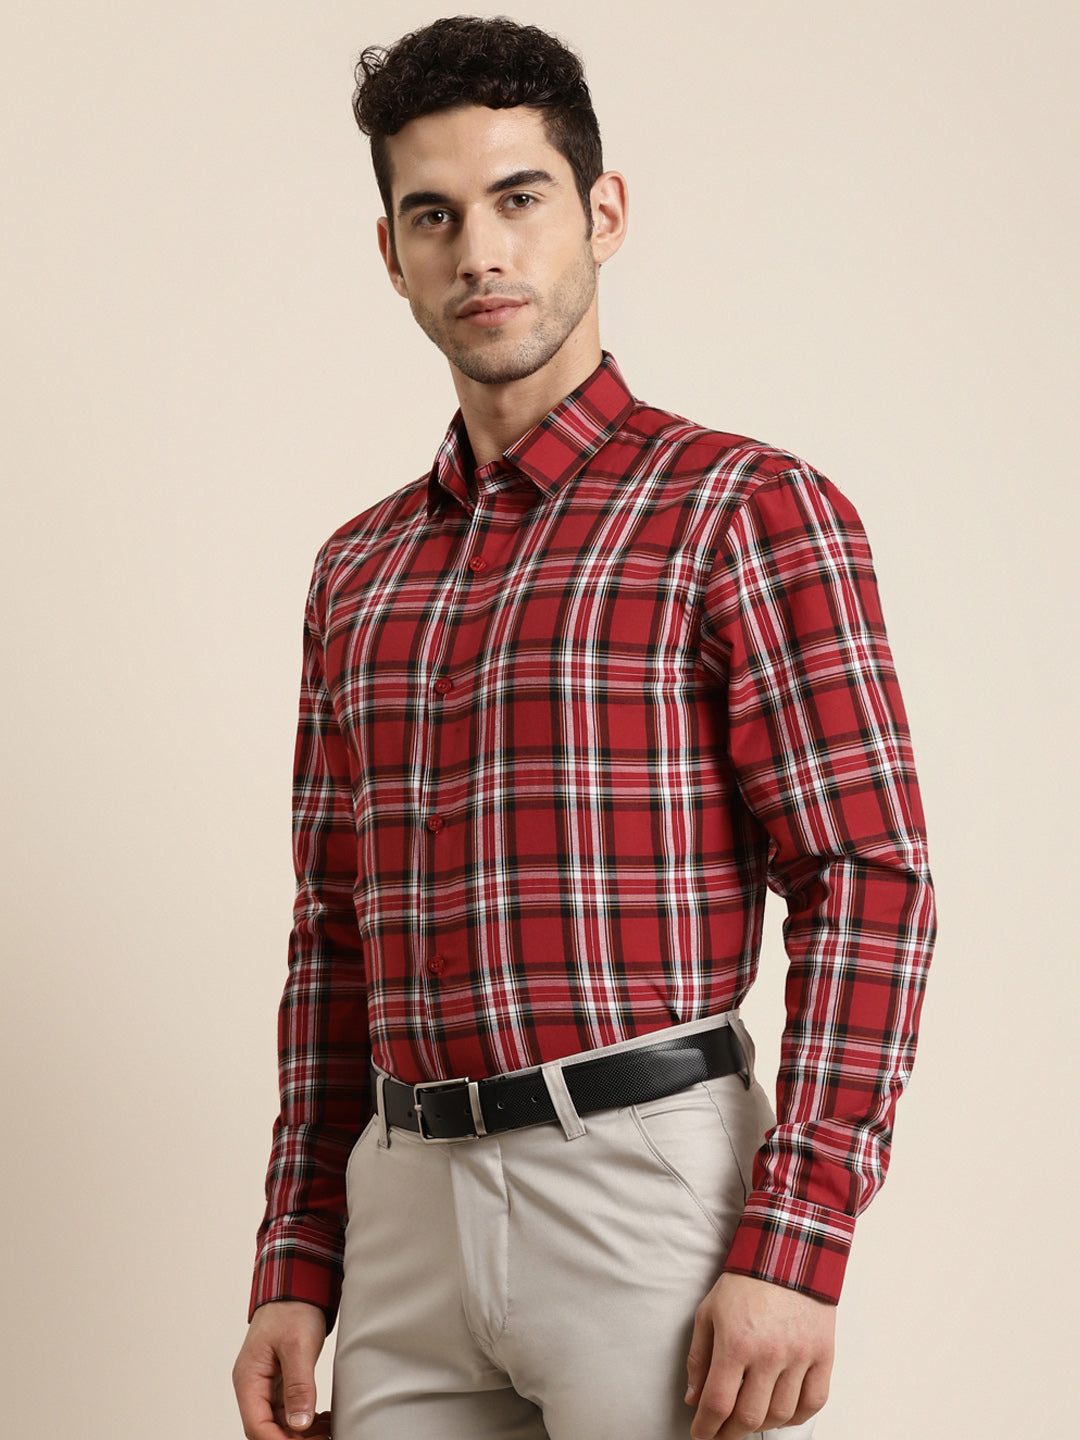 Men's Cotton Red & White & Casual Shirt